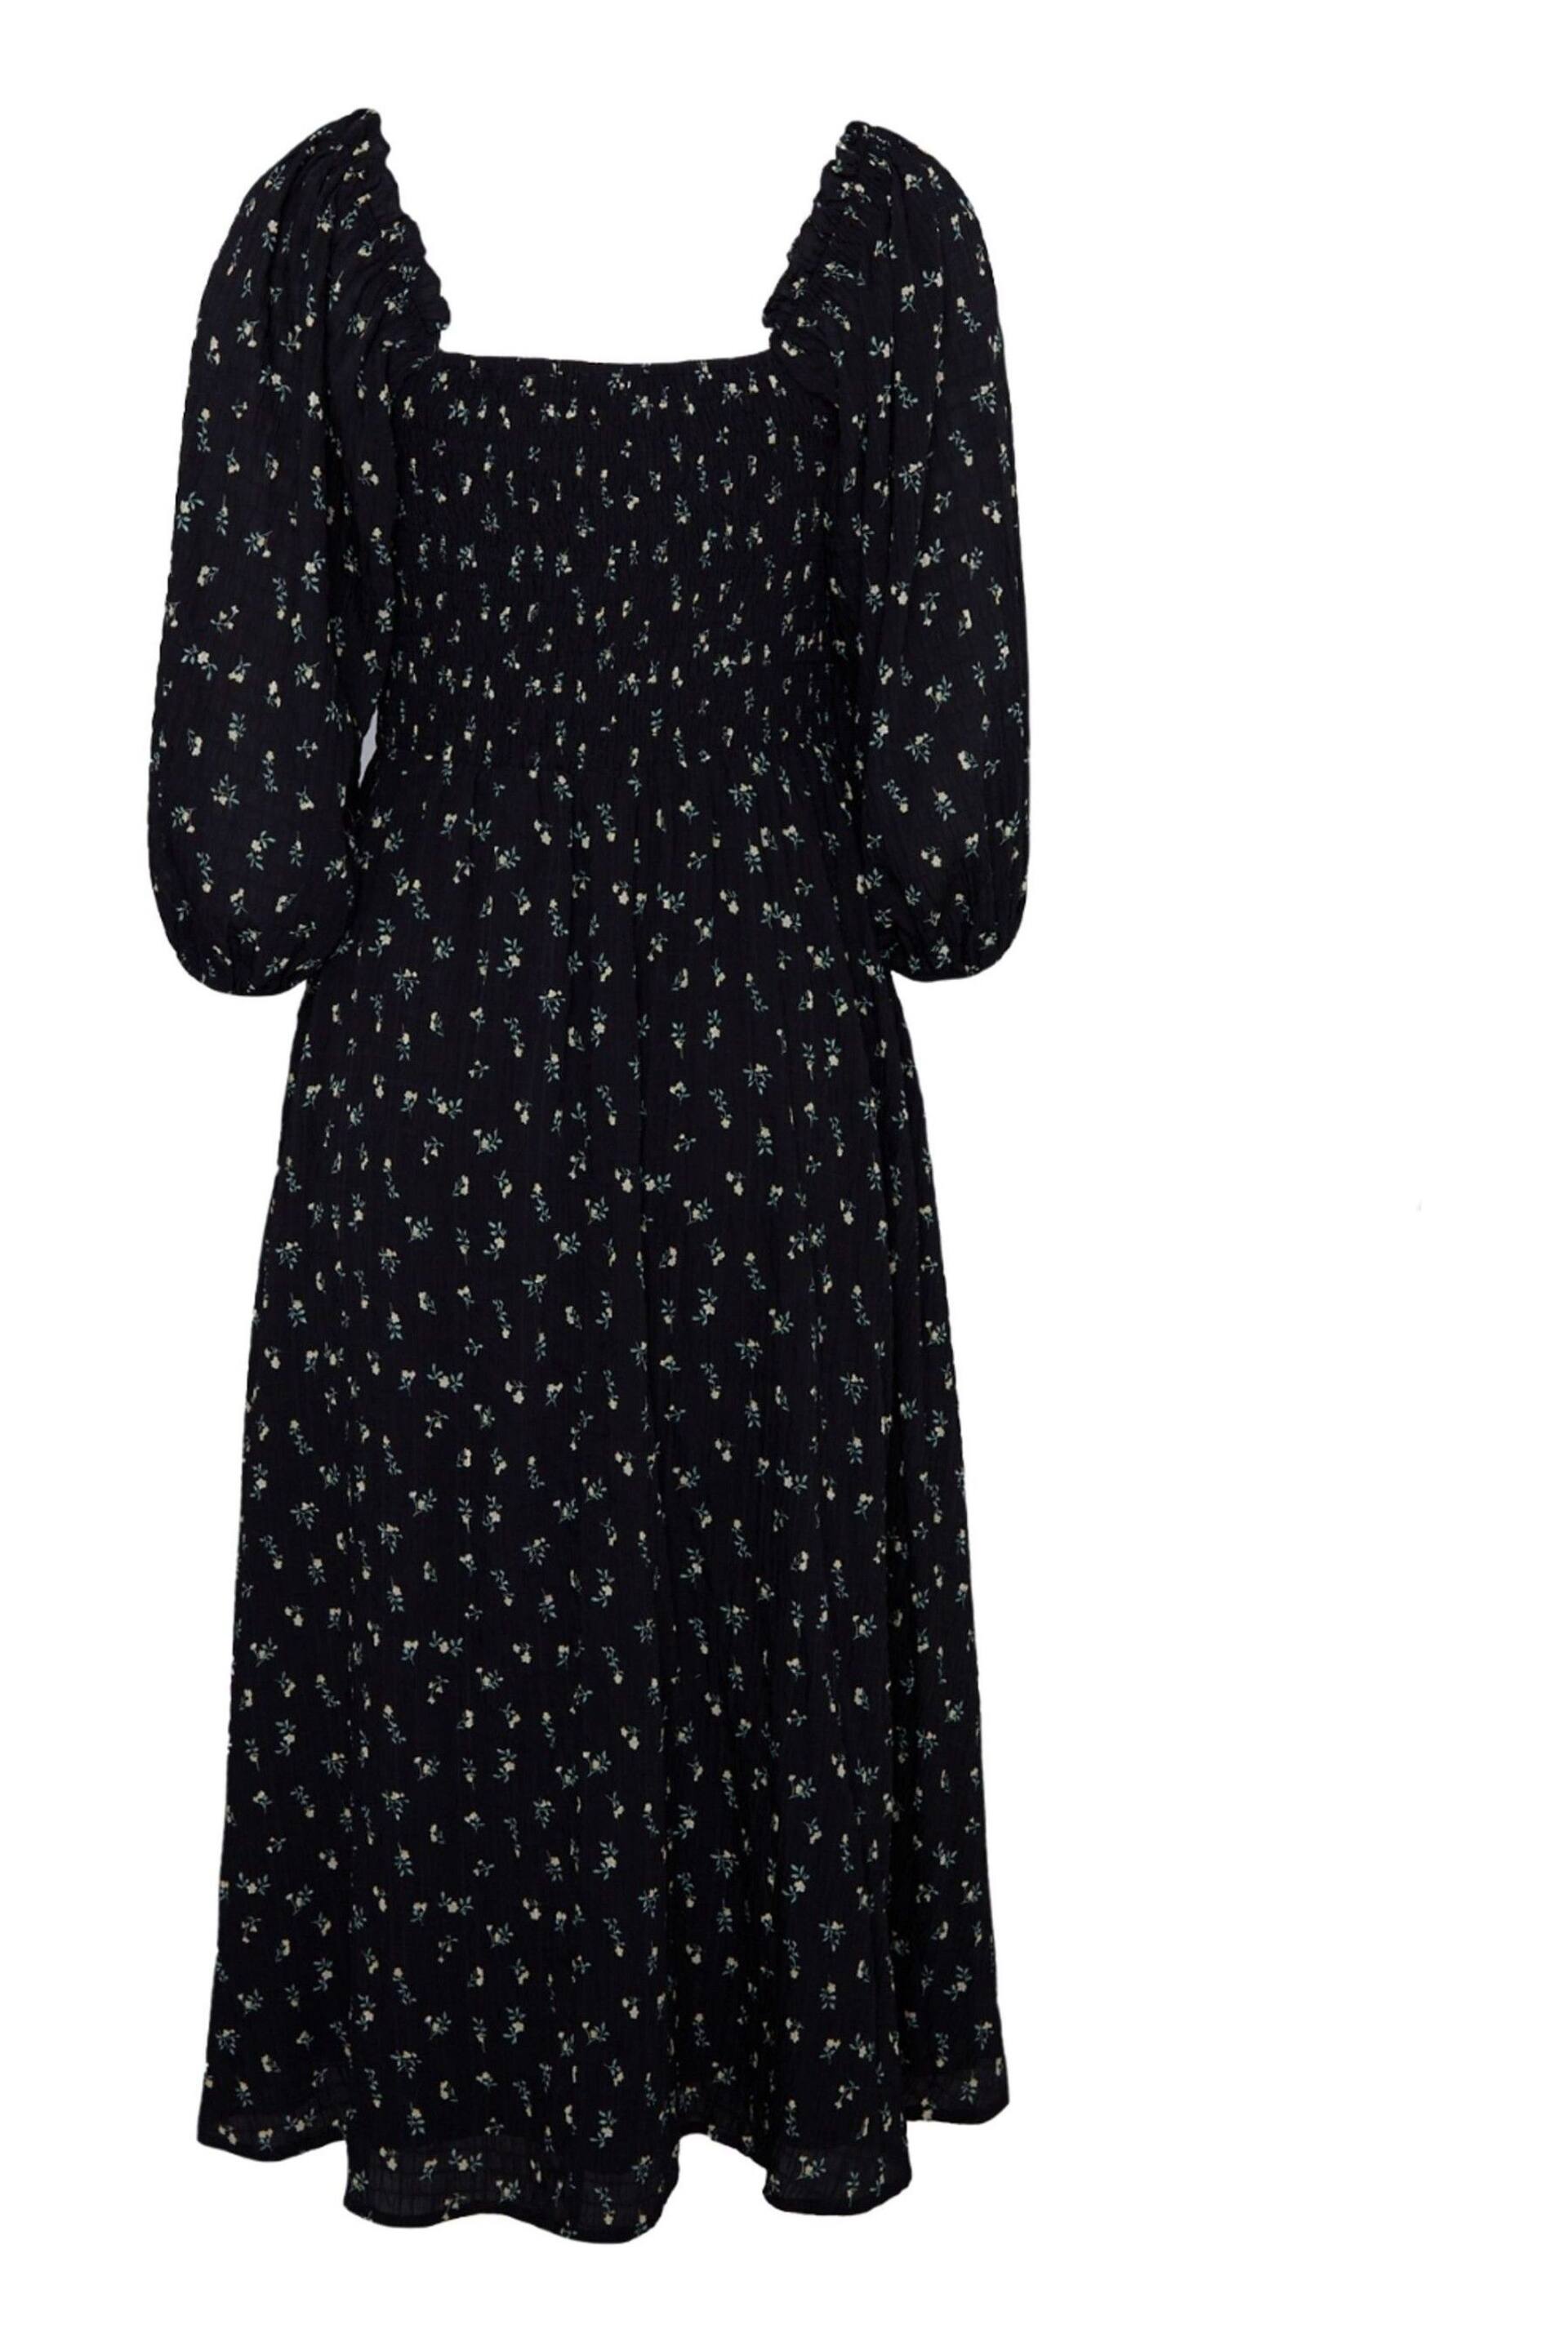 Another Sunday Shirred Bust 3/4 Sleeve Milkmaid Ditsy Print Black Dress - Image 5 of 6